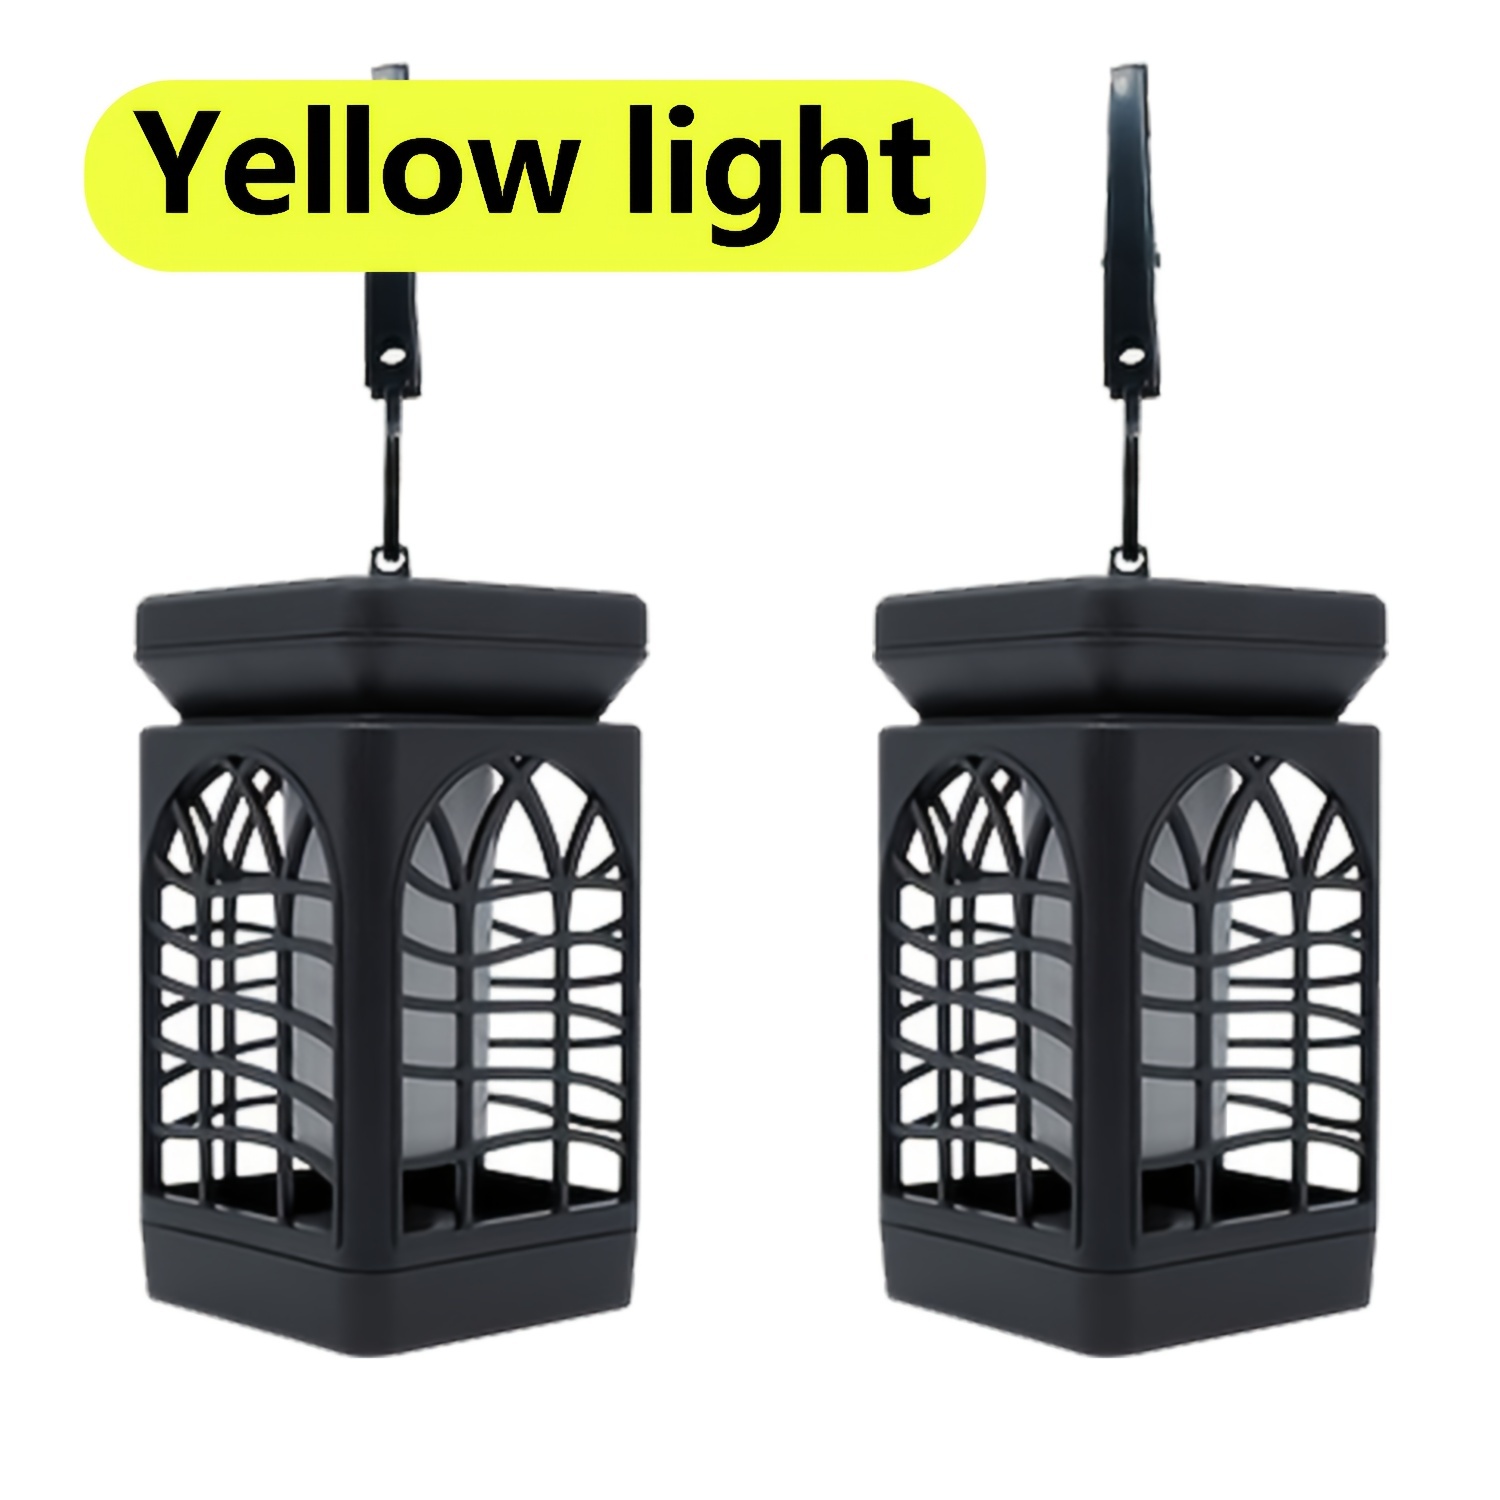 YoungPower Hanging Solar Lanterns Outdoor Waterproof Flickering Flame  Camping Solar Powered Lights Decorative Lights for Halloween Decorations  Home